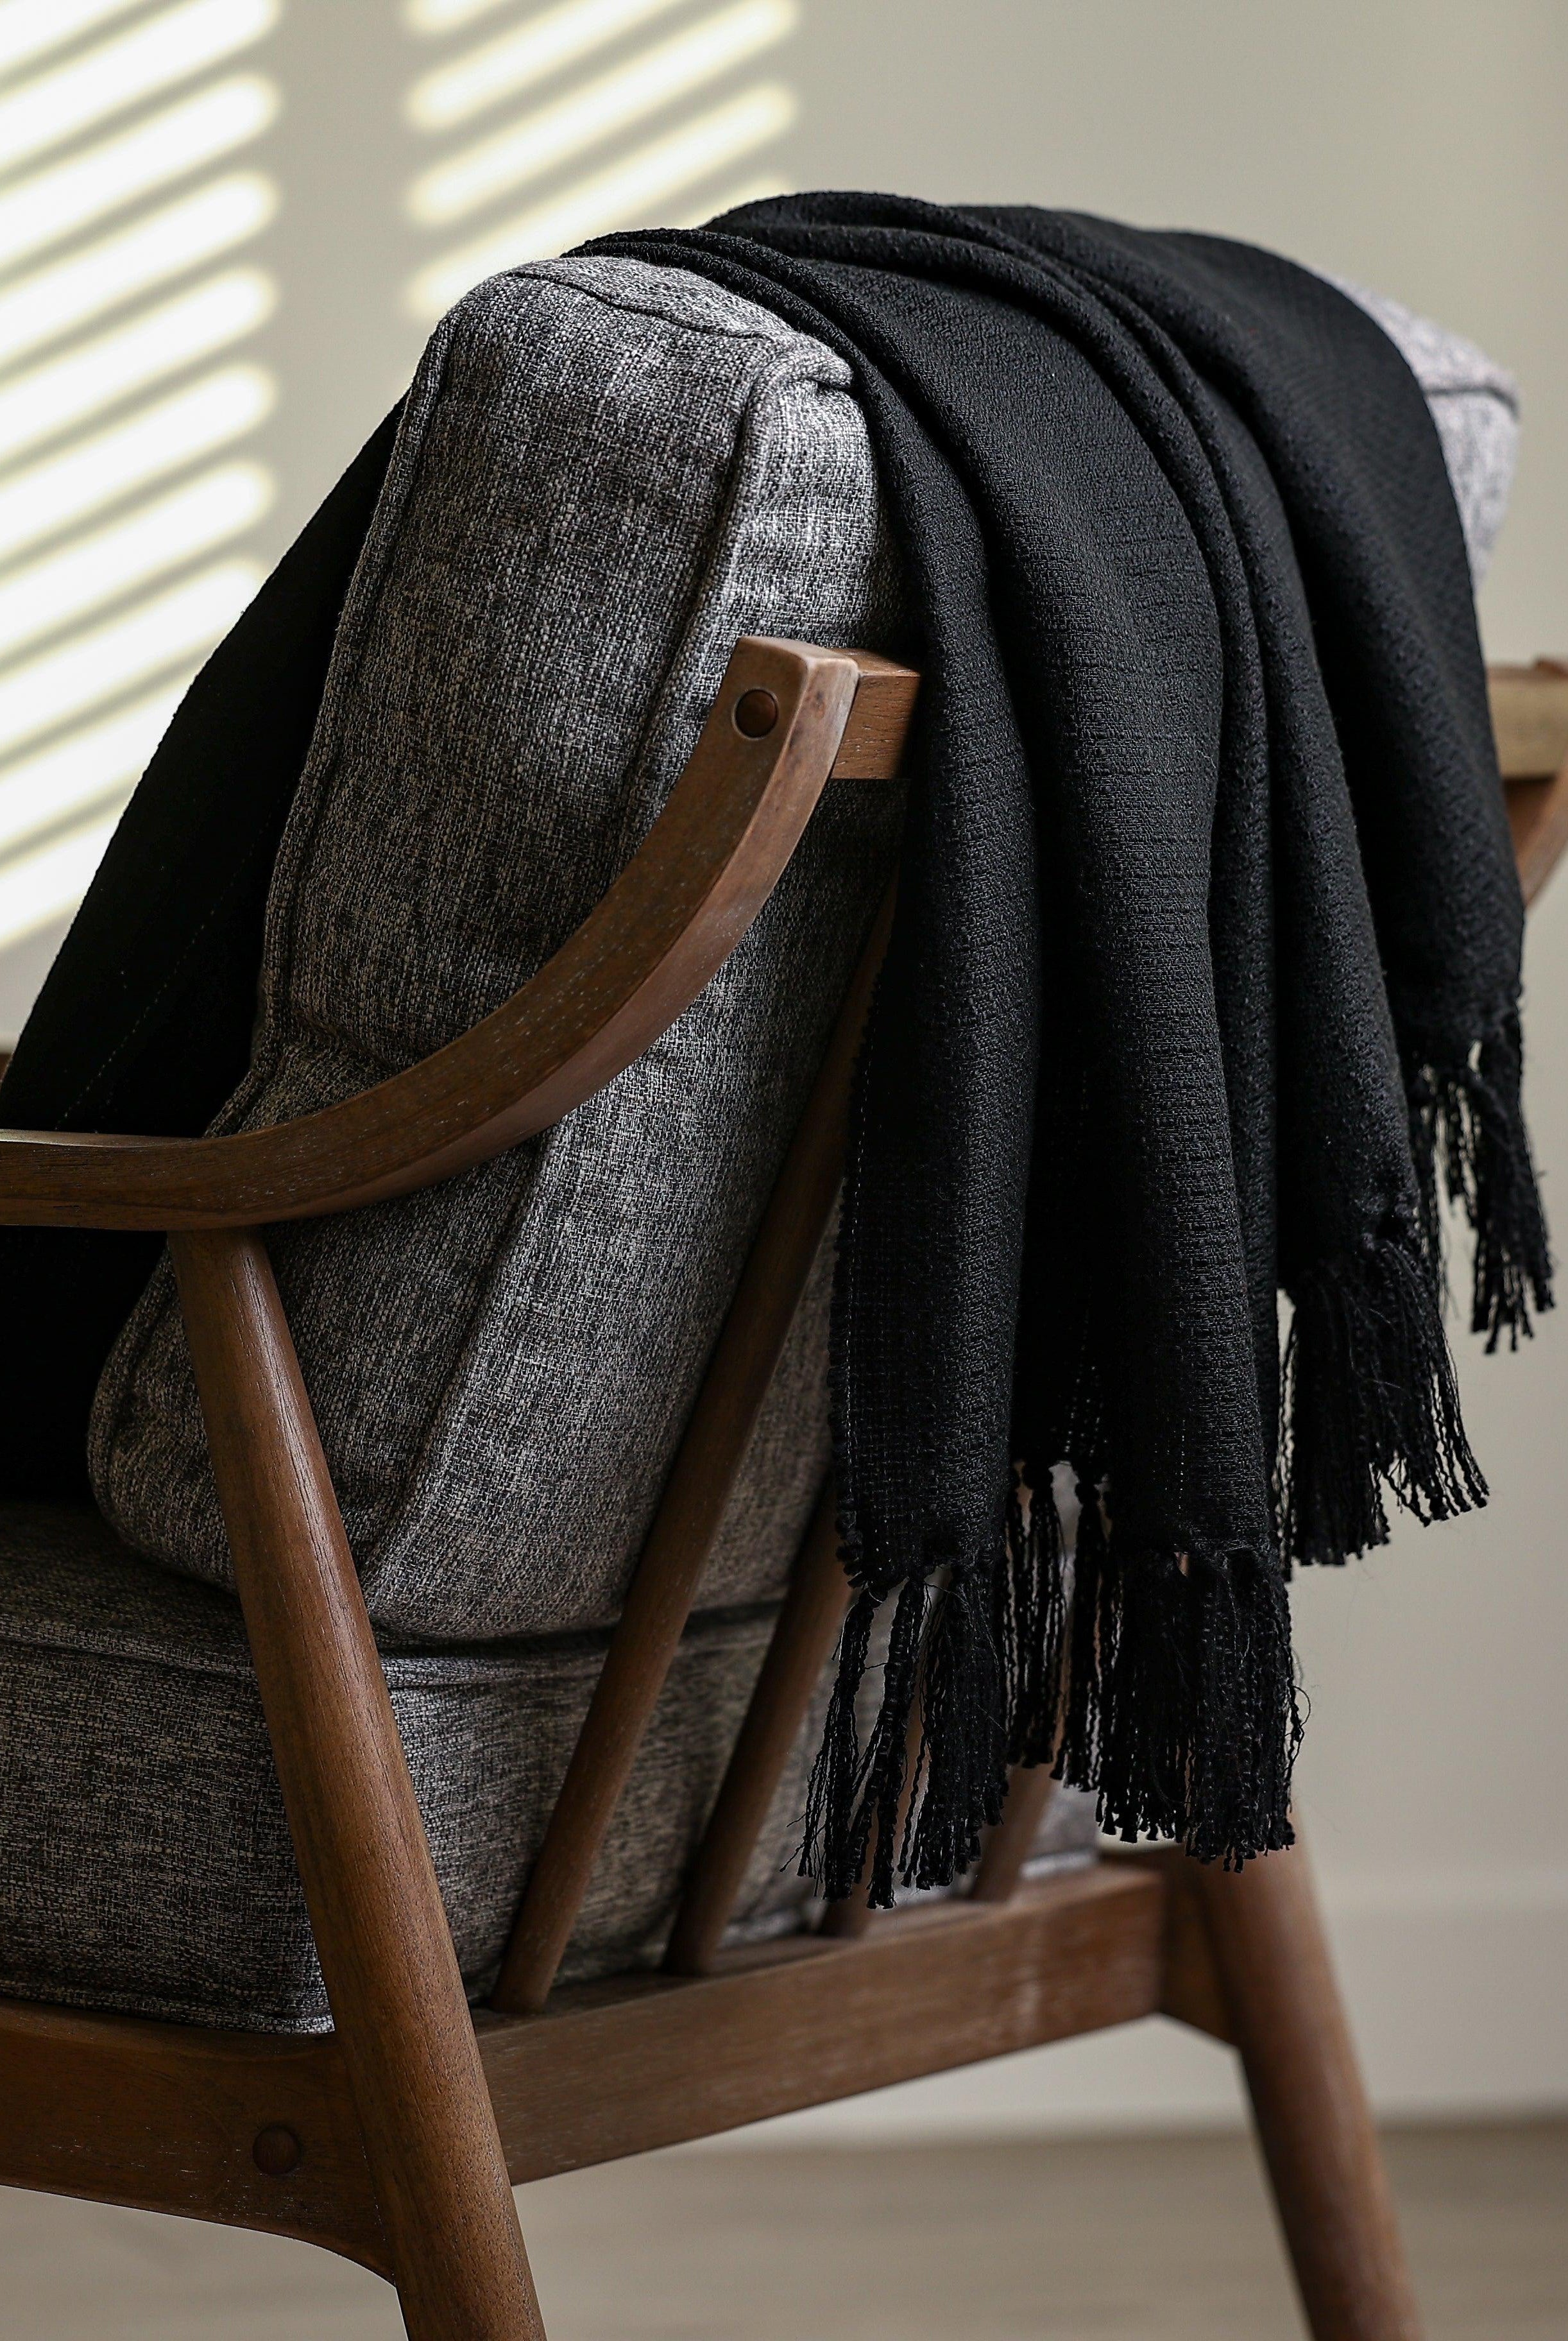 SOLID BLACK CHUNKY TEXTURED THROW BLANKET - Boucle Home